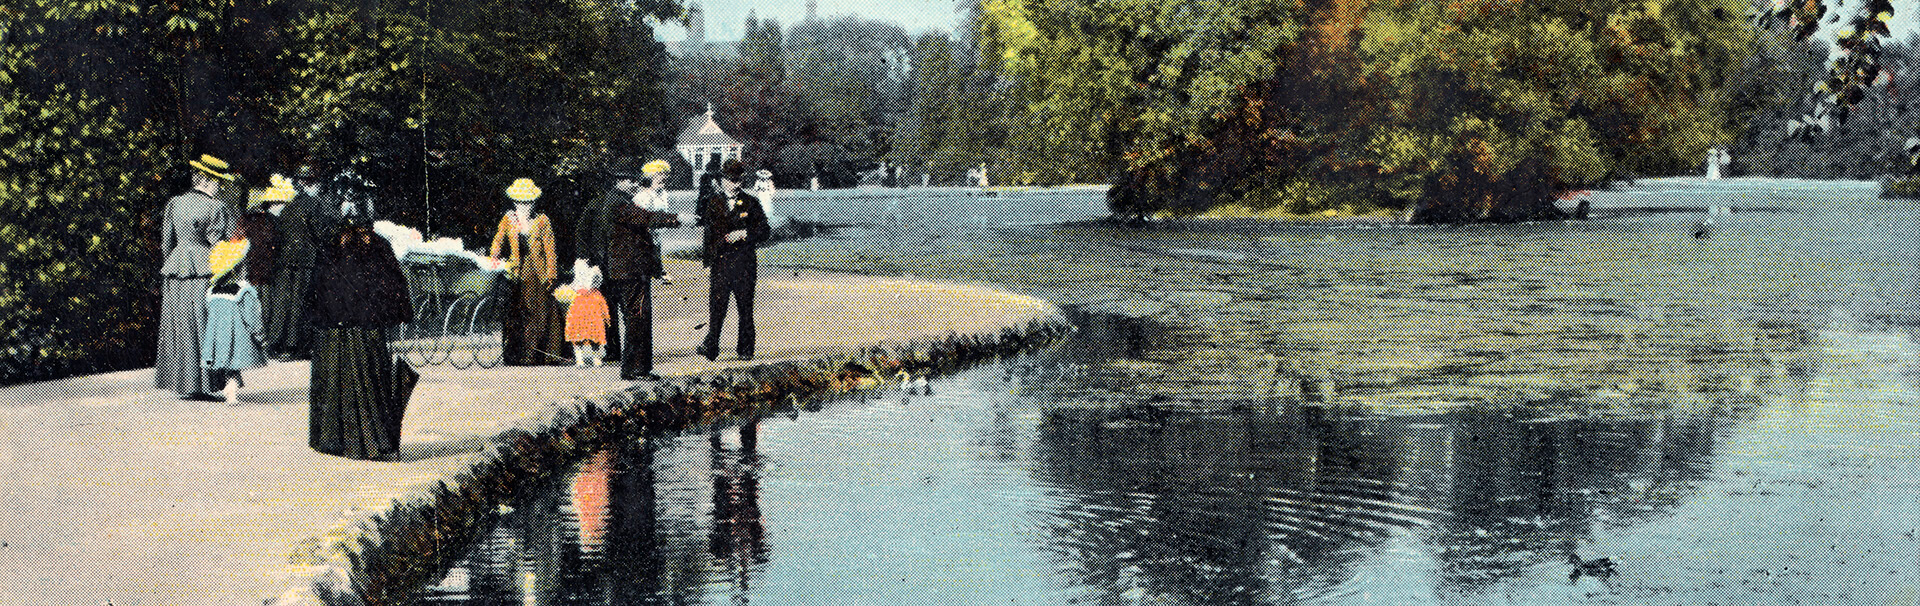 The Lake, Middlesbrough, North Yorkshire - a historic postcard